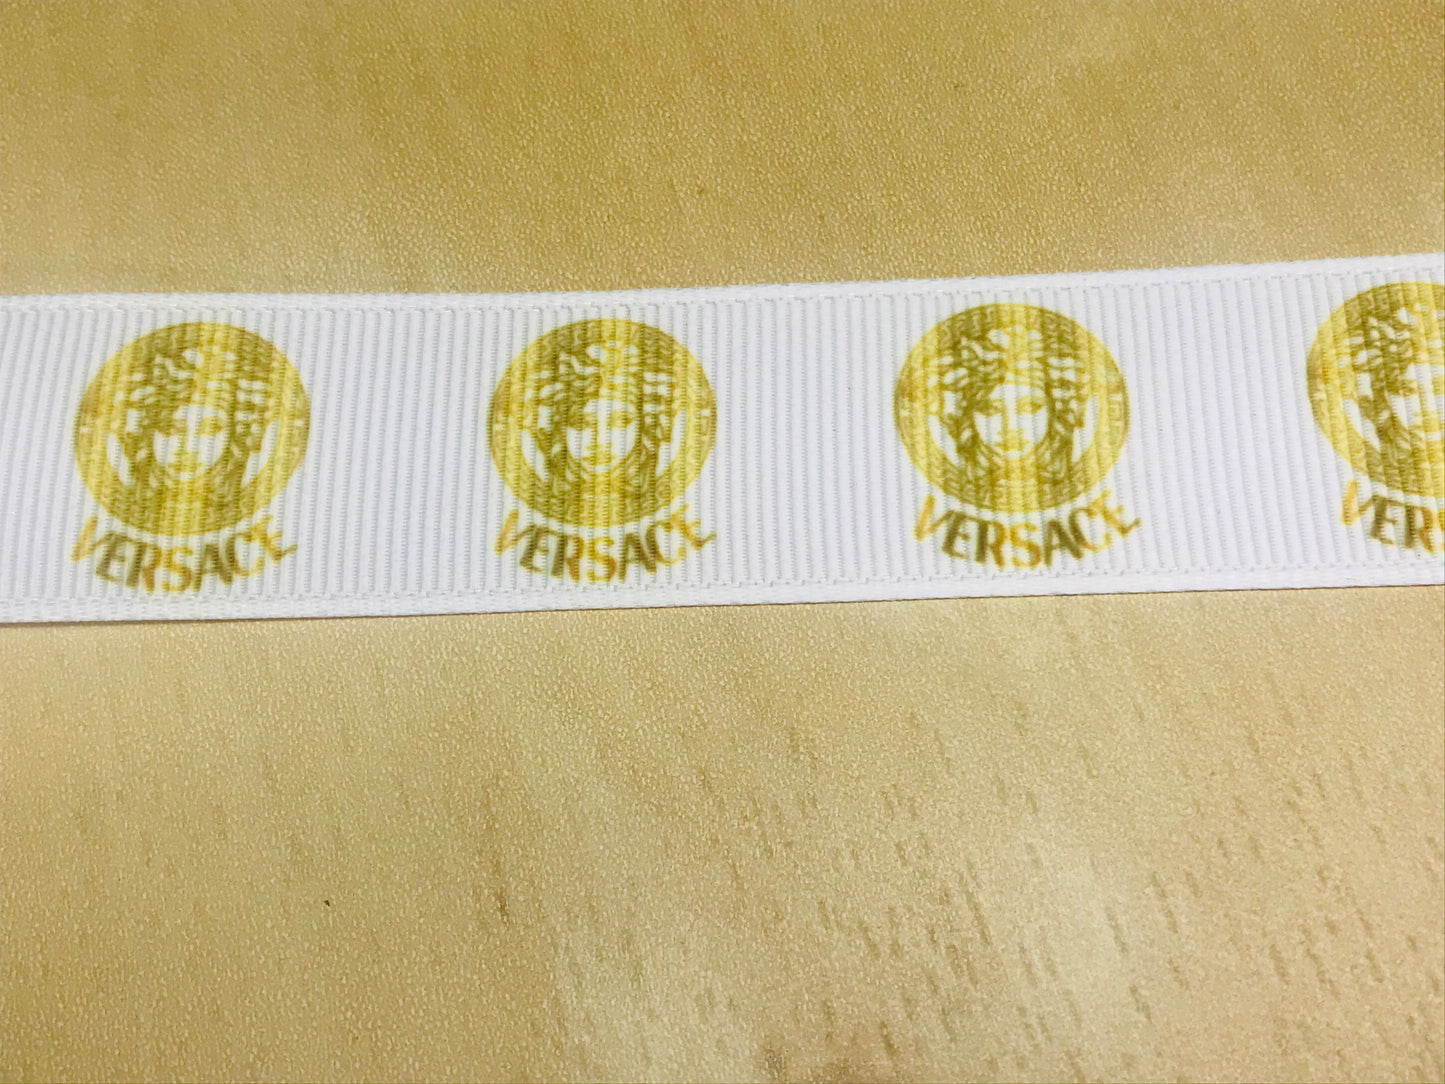 7/8" Versace Inspired White and Gold Grosgrain Ribbon